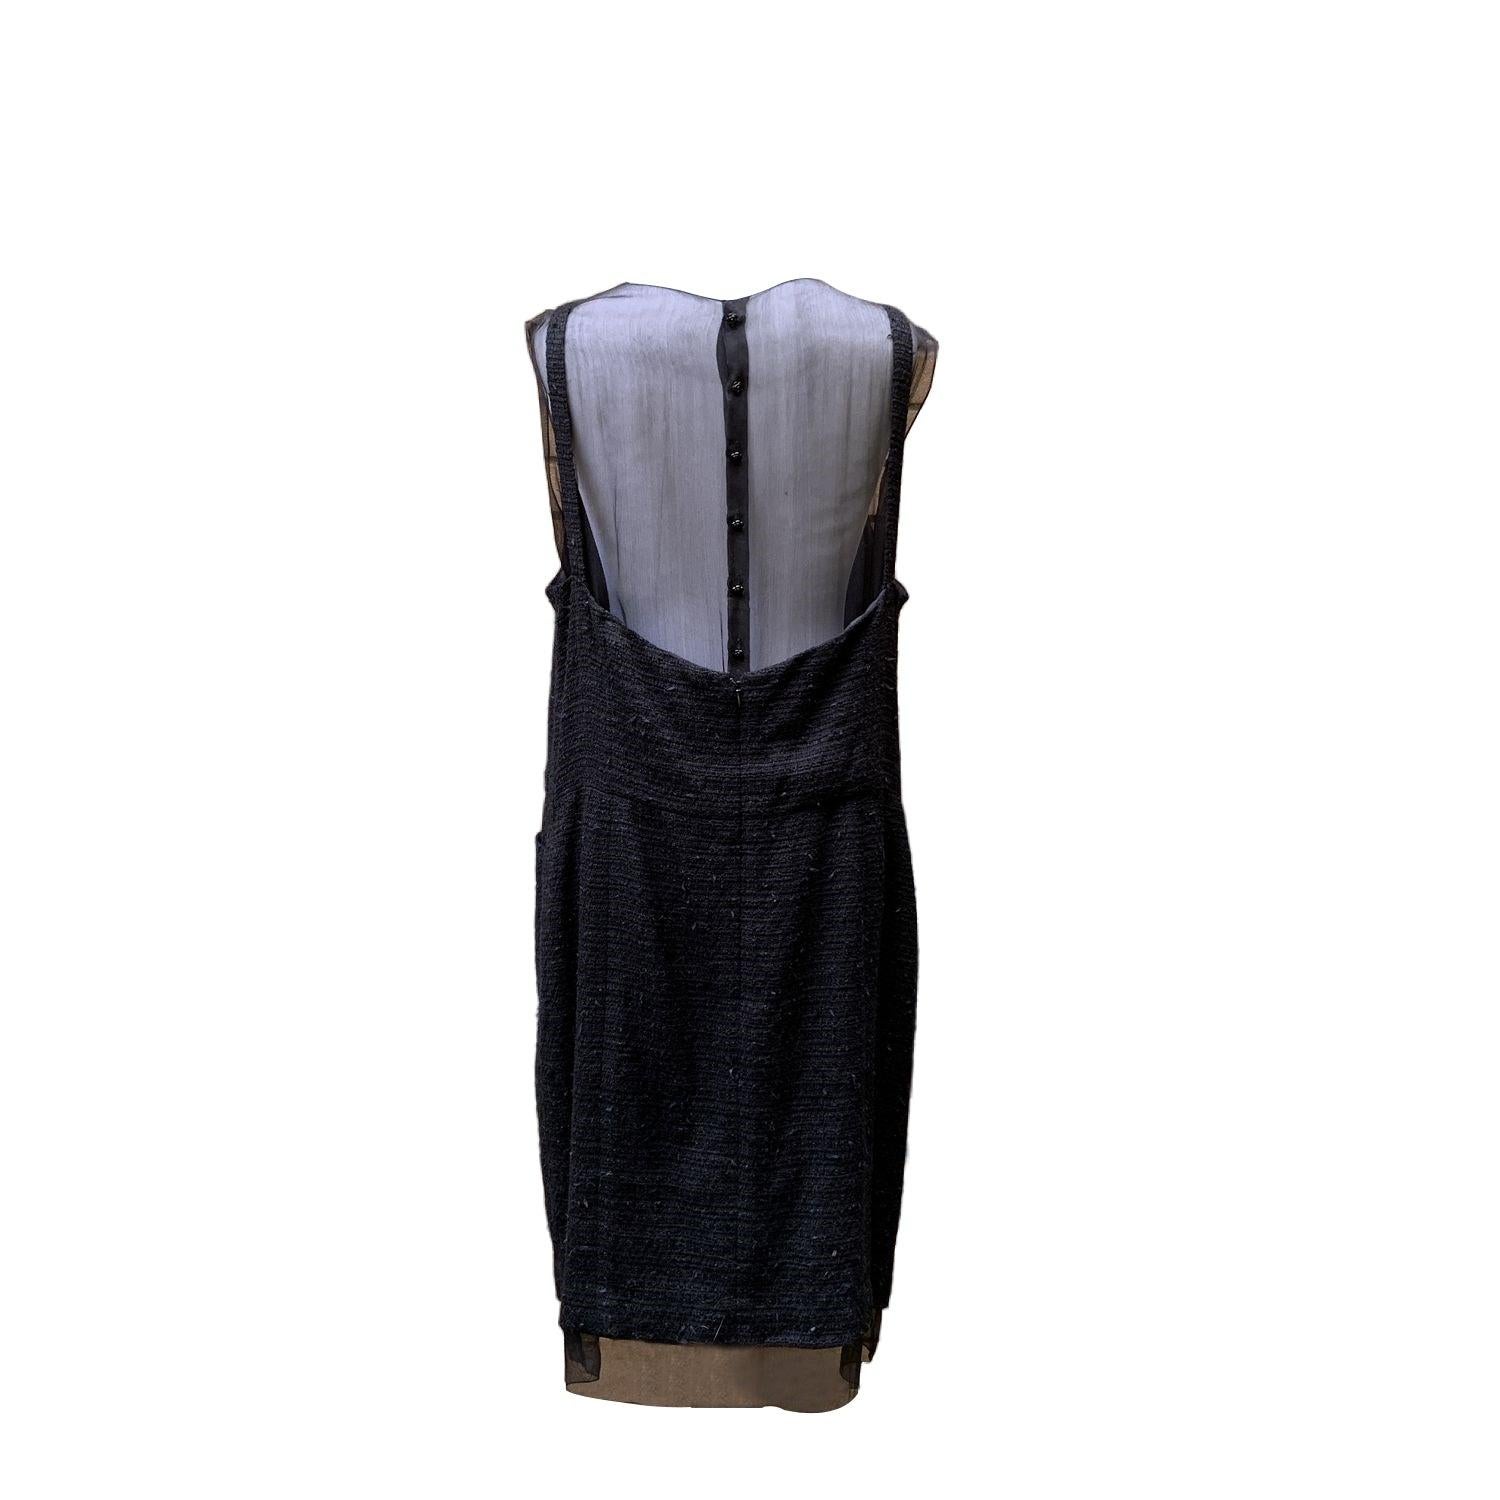 Chanel Little Black Sleeveless Dress Chiffon Underlay Size 48 FR In Good Condition For Sale In Rome, Rome